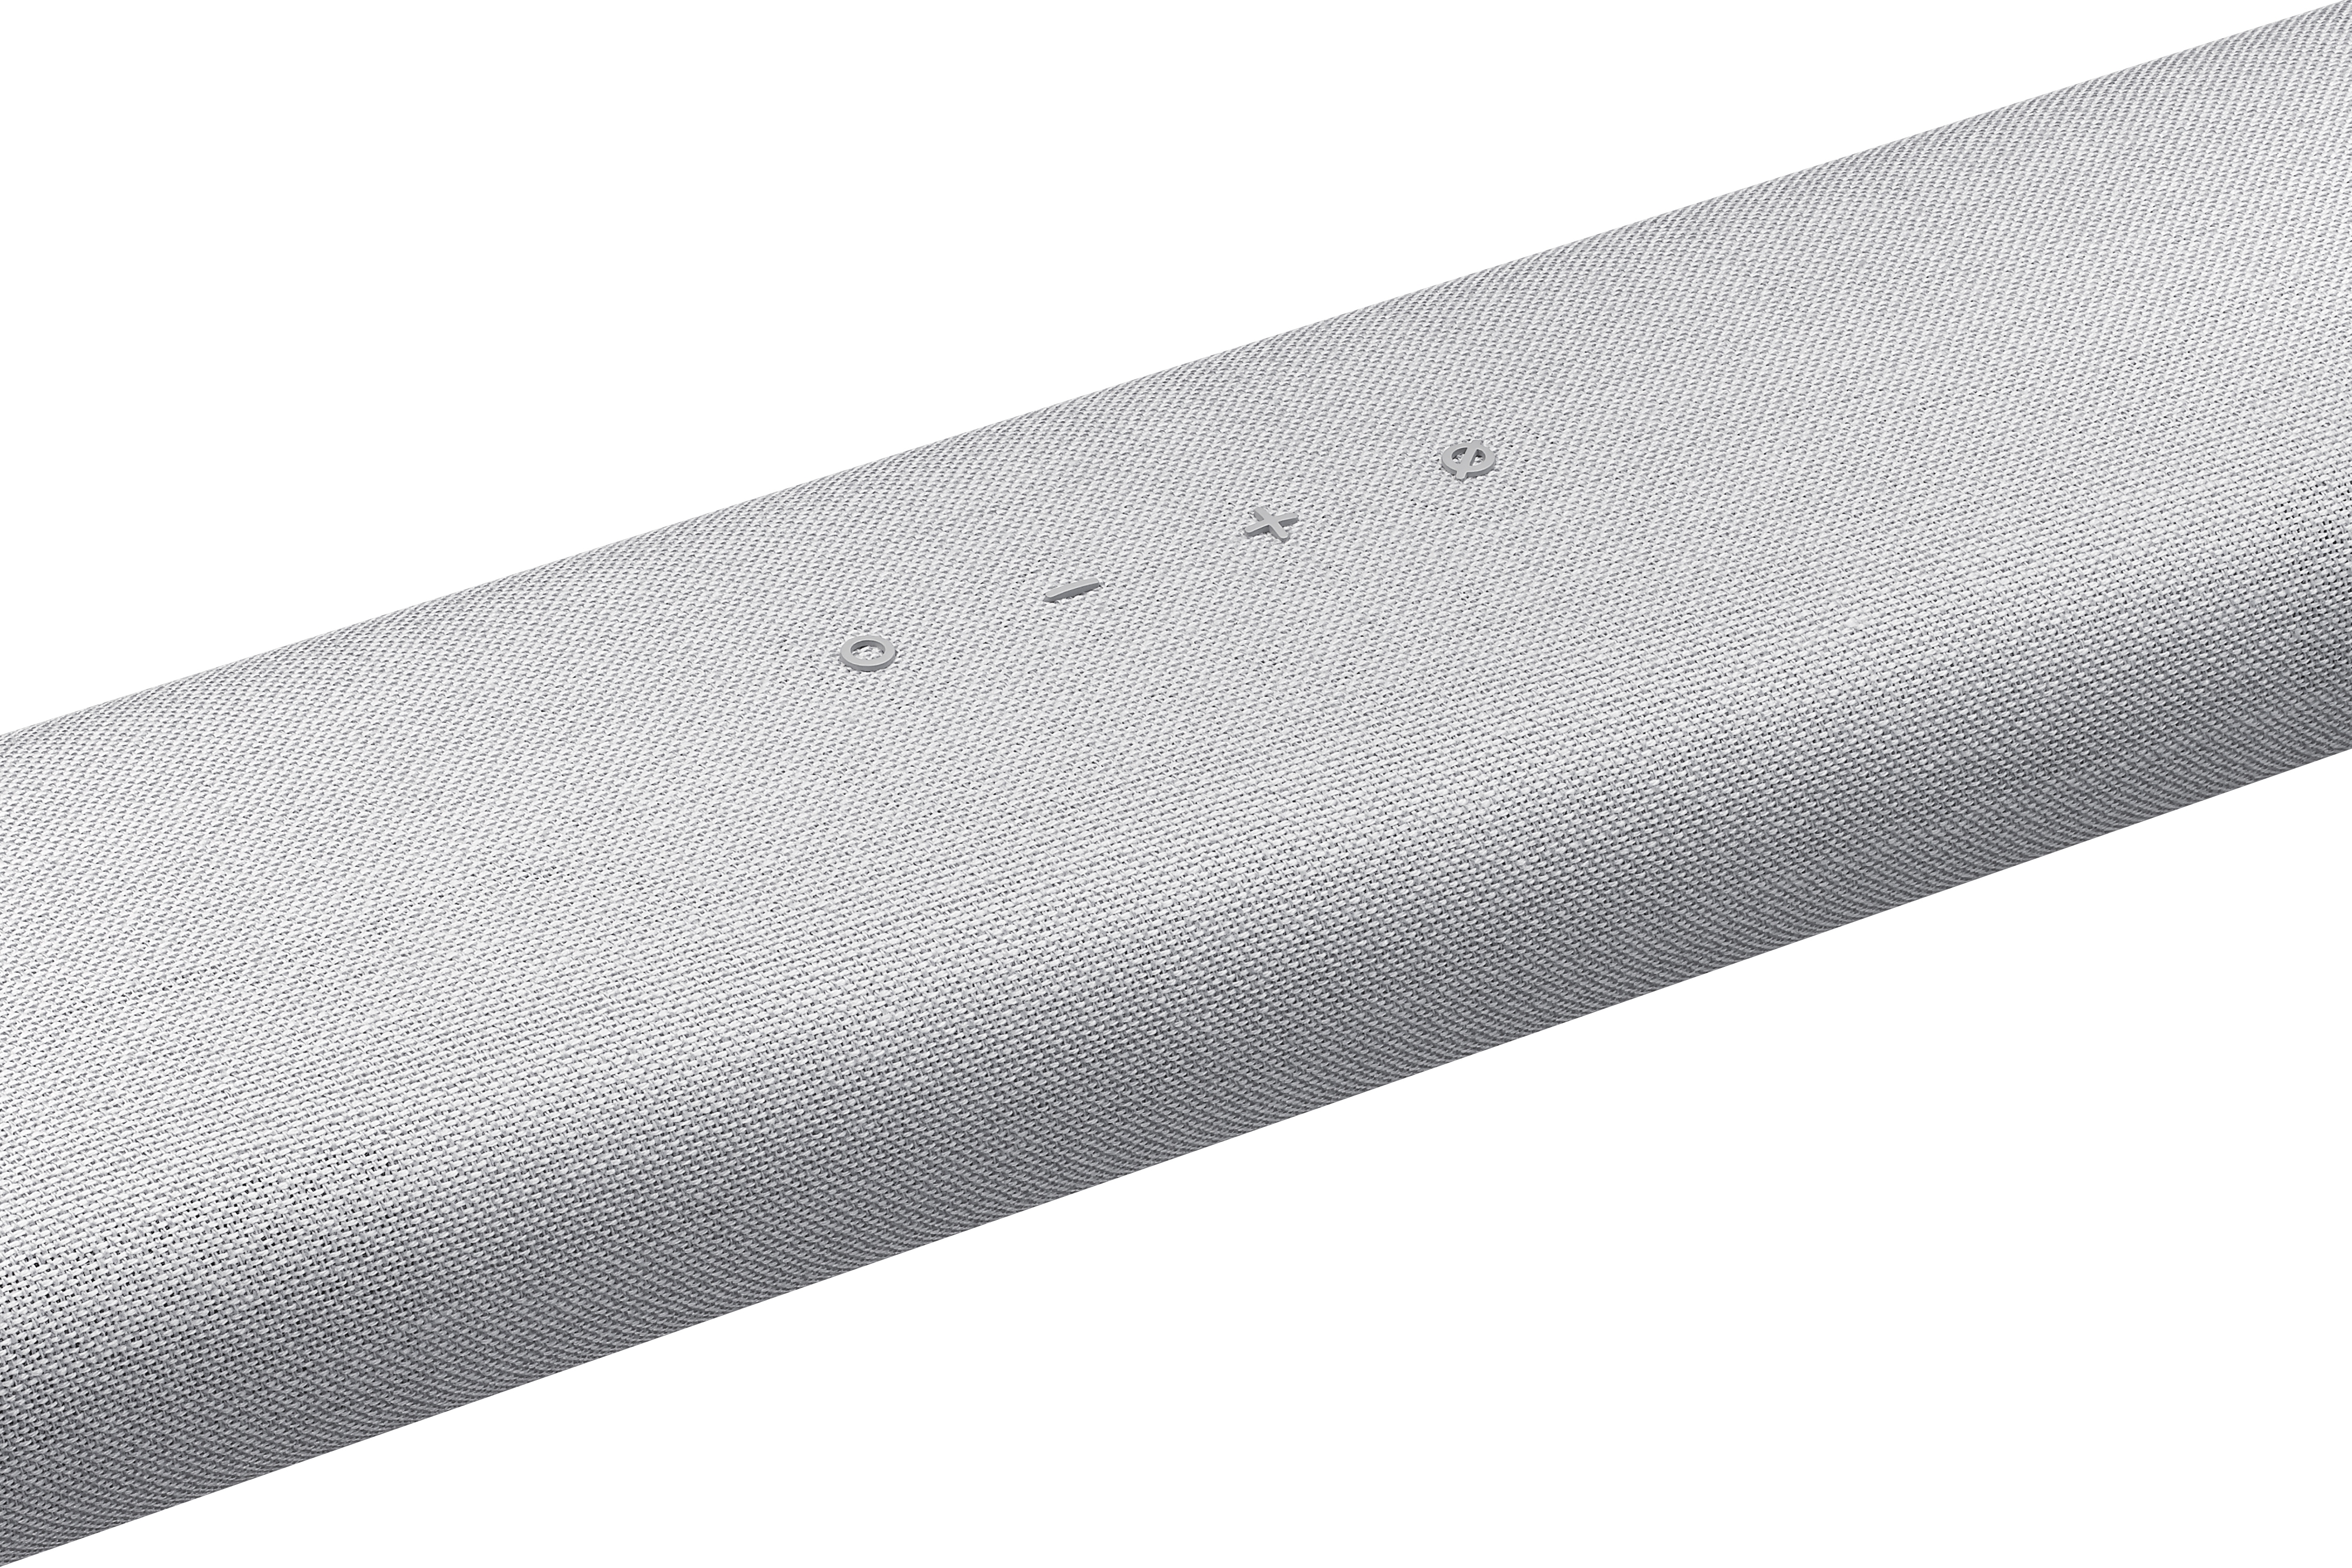 Thumbnail image of HW-S61A 5.0ch All-in-One Soundbar w/ Acoustic Beam and Alexa Built-in (2021)